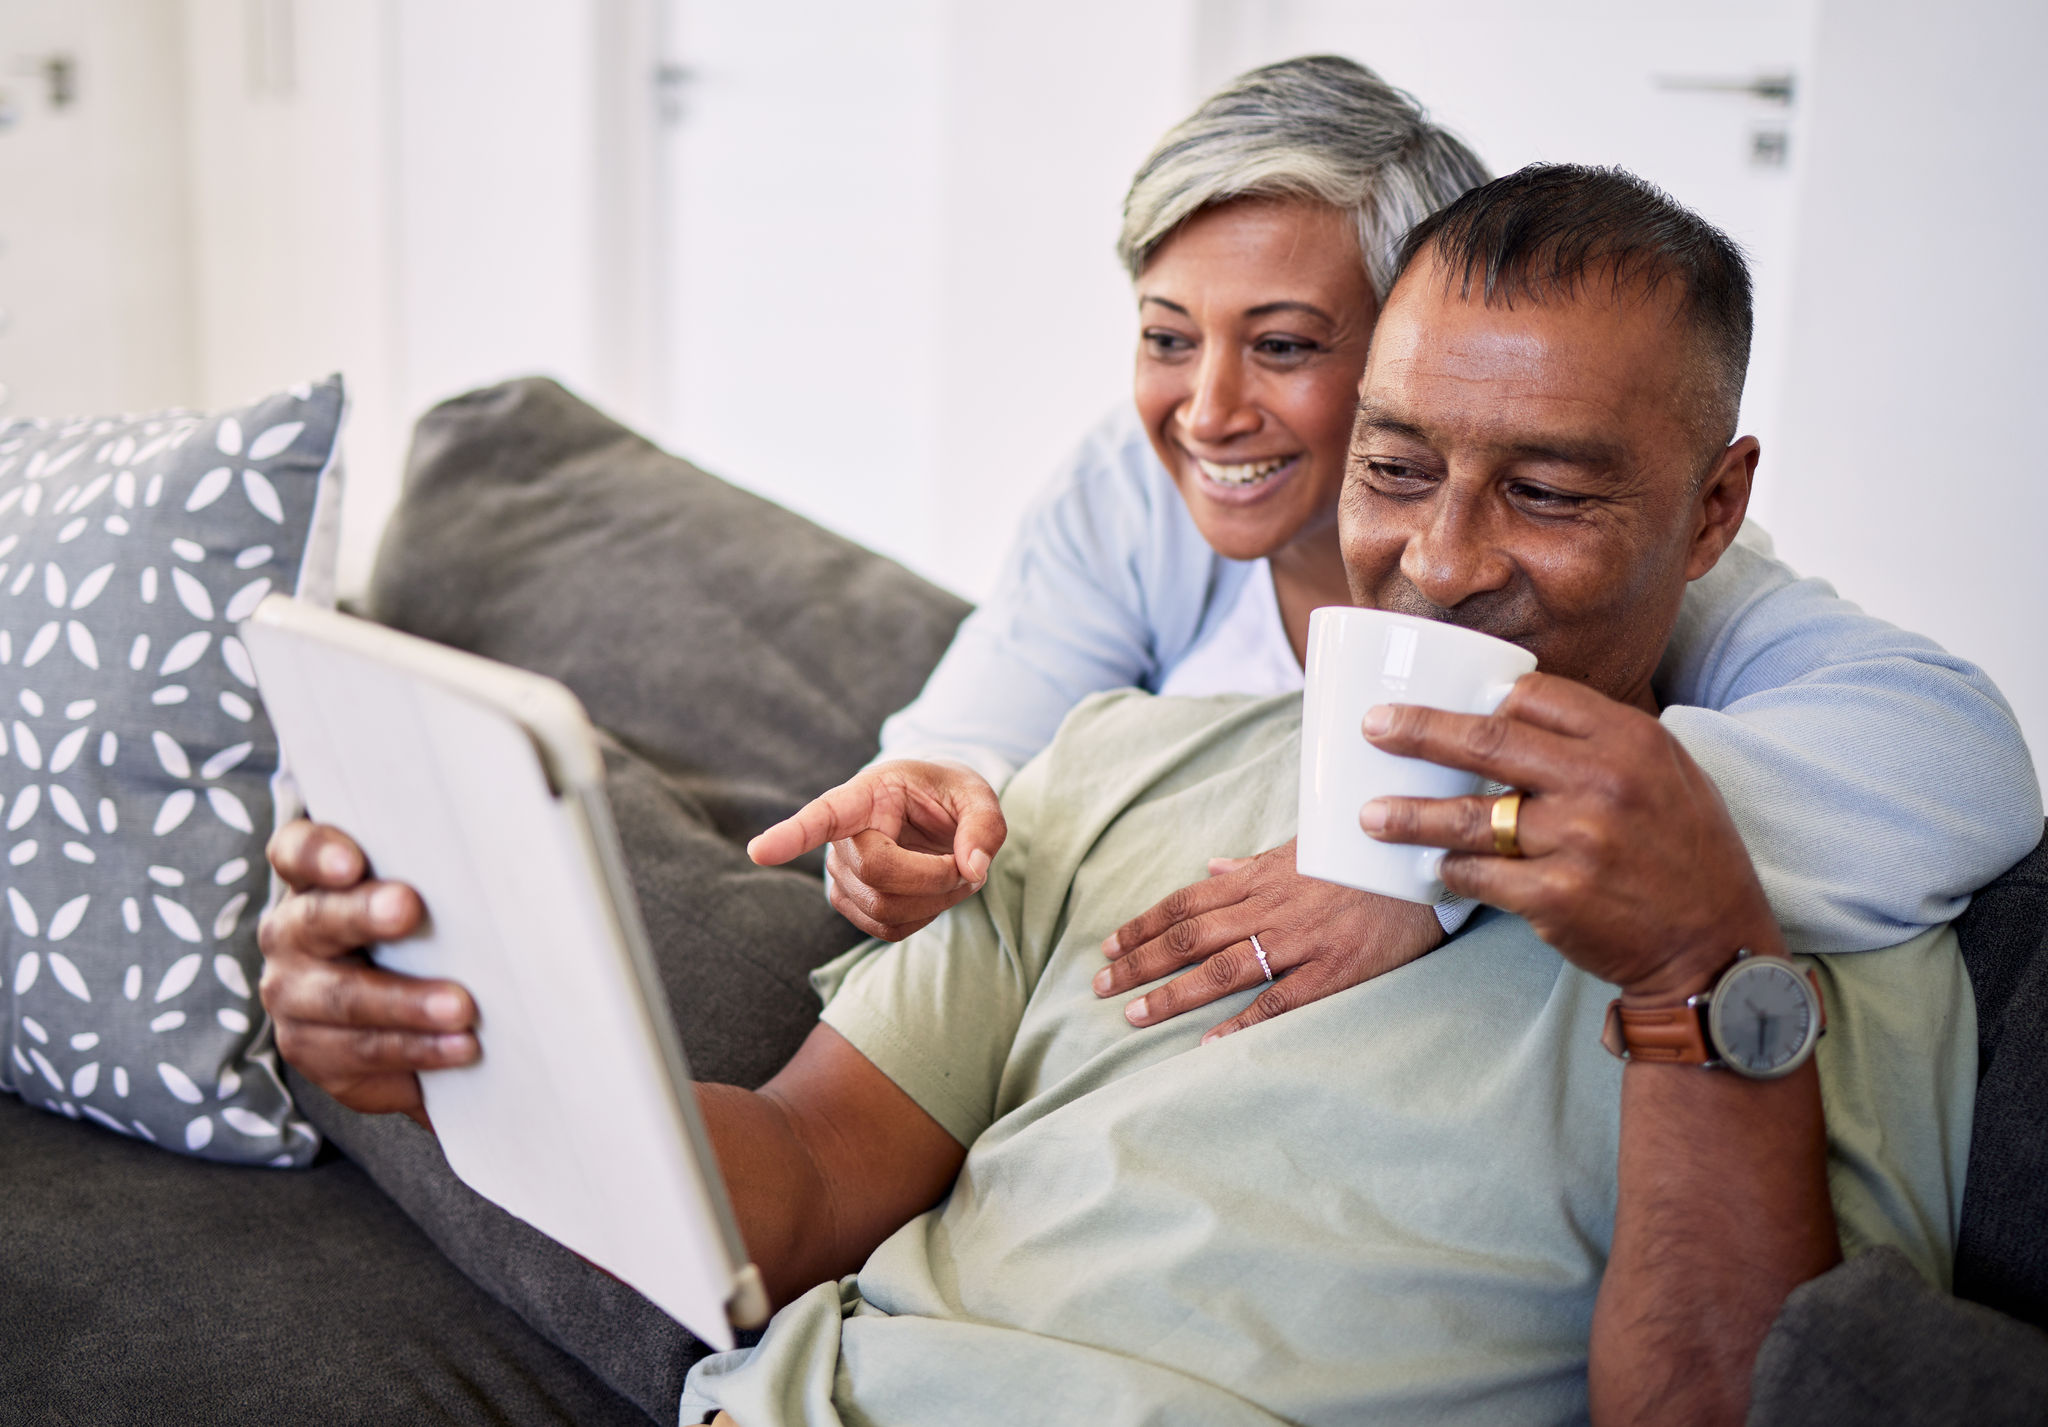 Home, tablet and happy senior couple on sofa, relax and check email, news article and point at online shopping choice. Website info, decision or elderly man, old woman or people smile in living room.